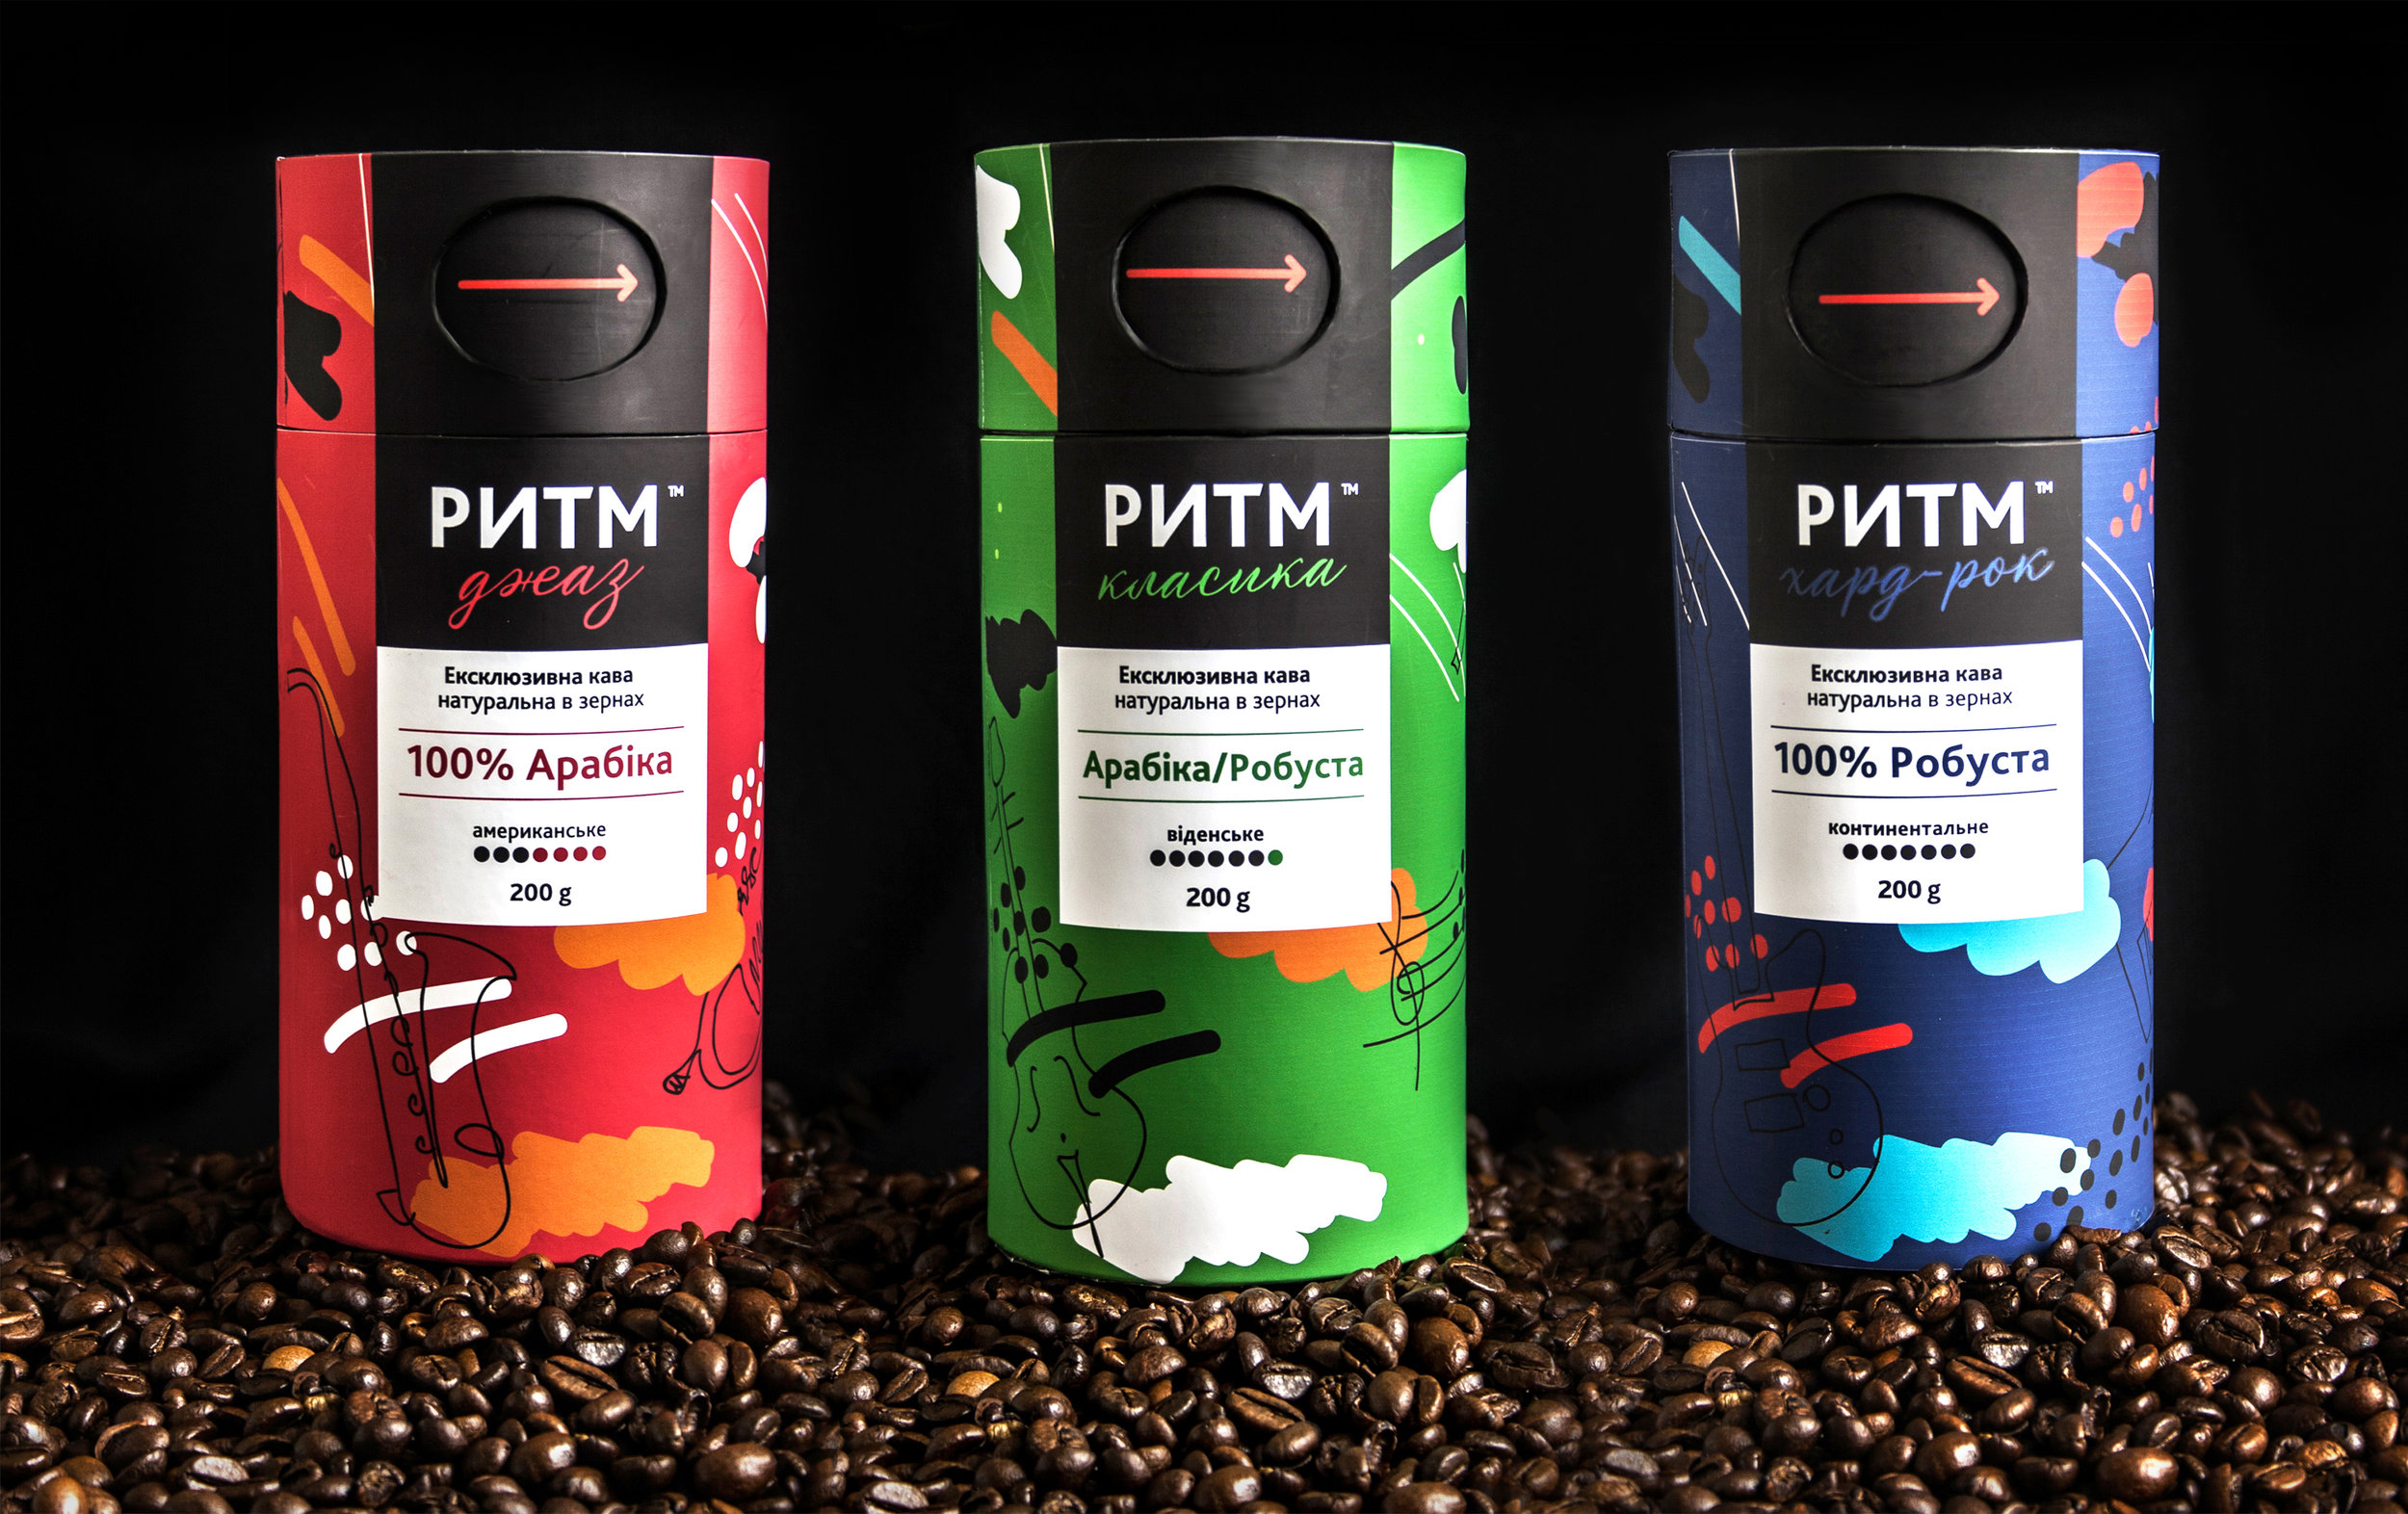 Student Concept of Packaging Design for Coffee